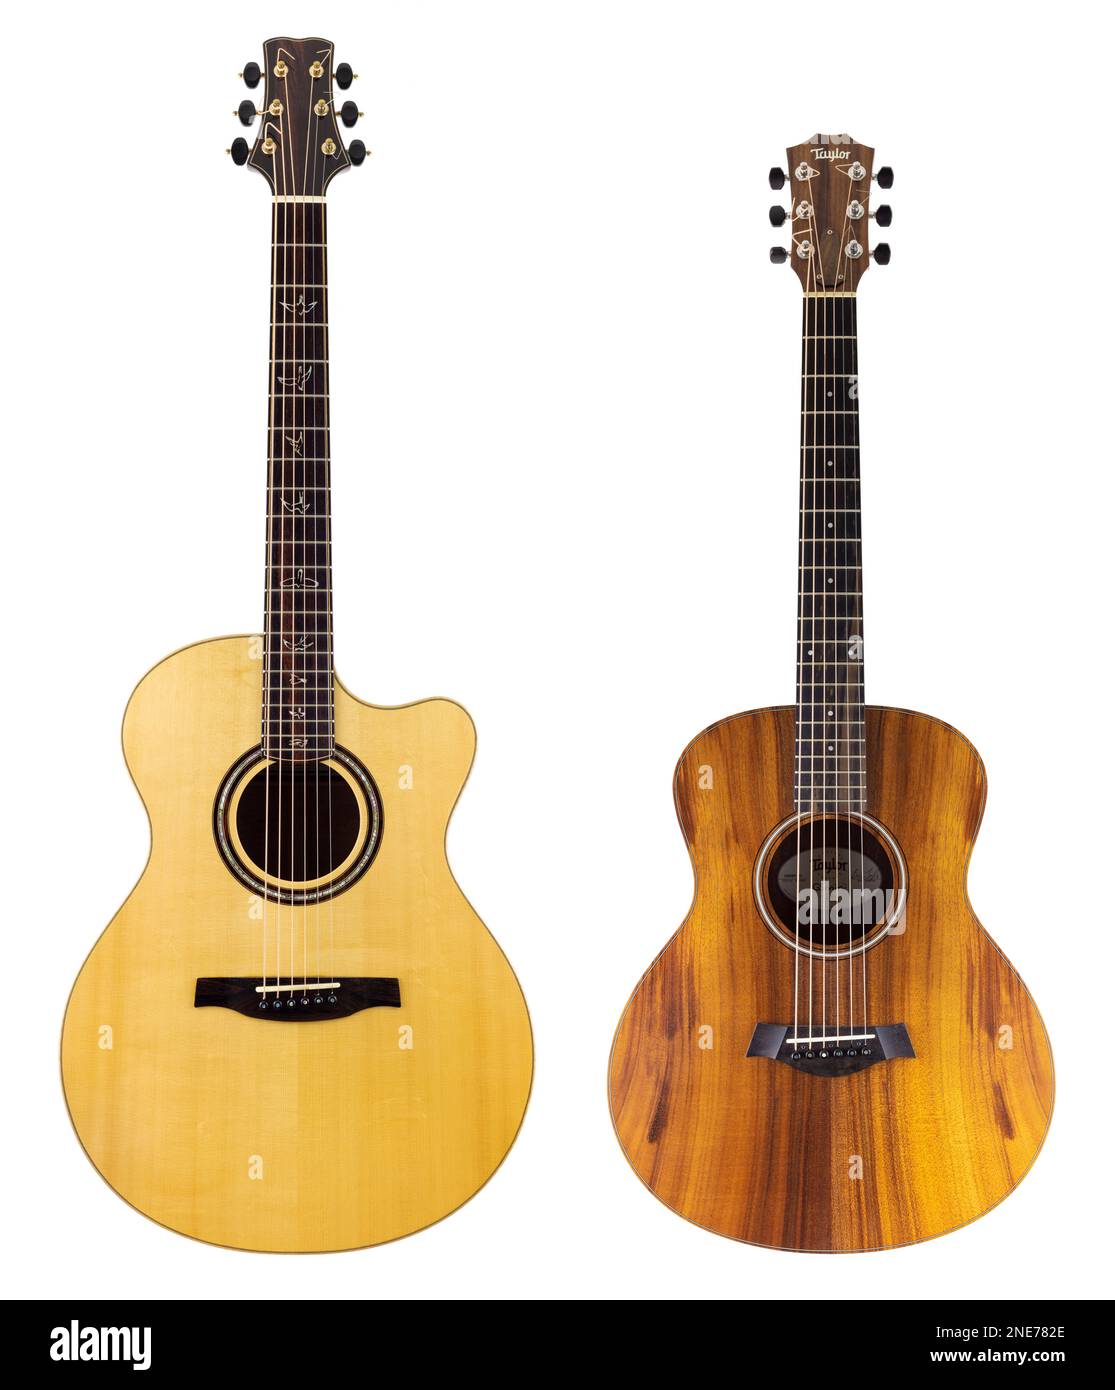 Guitars Two guitars Two Acoustic Guitars cut out Guitars on white background  PRS Angelus acoustic guitar Taylor GS mini acoustic guitar Two guitars 2 Stock Photo